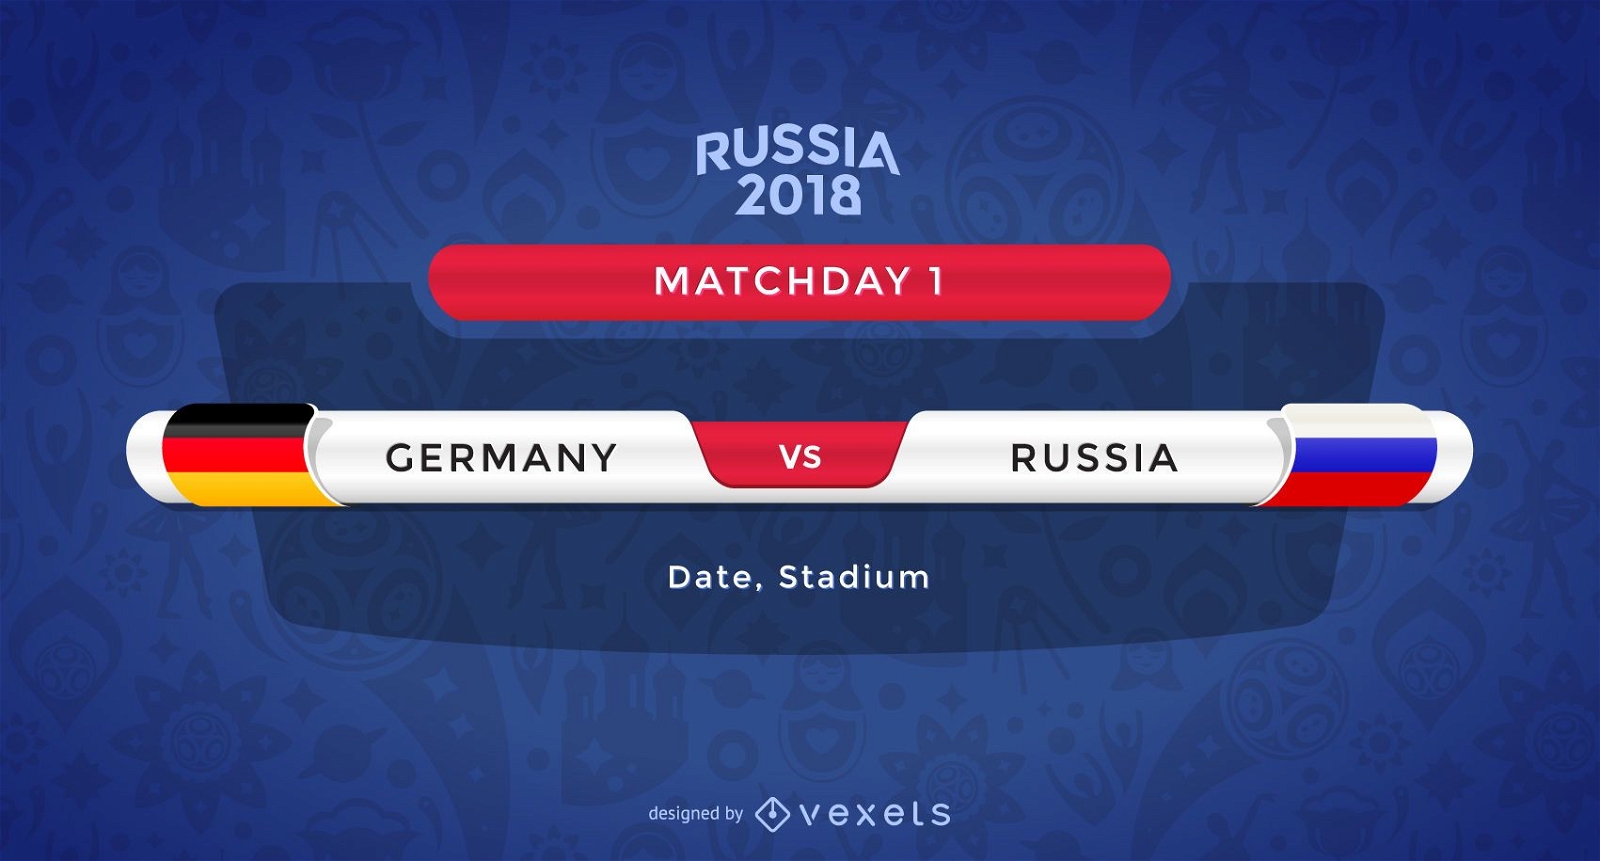 Russia 2018 World Cup match banners